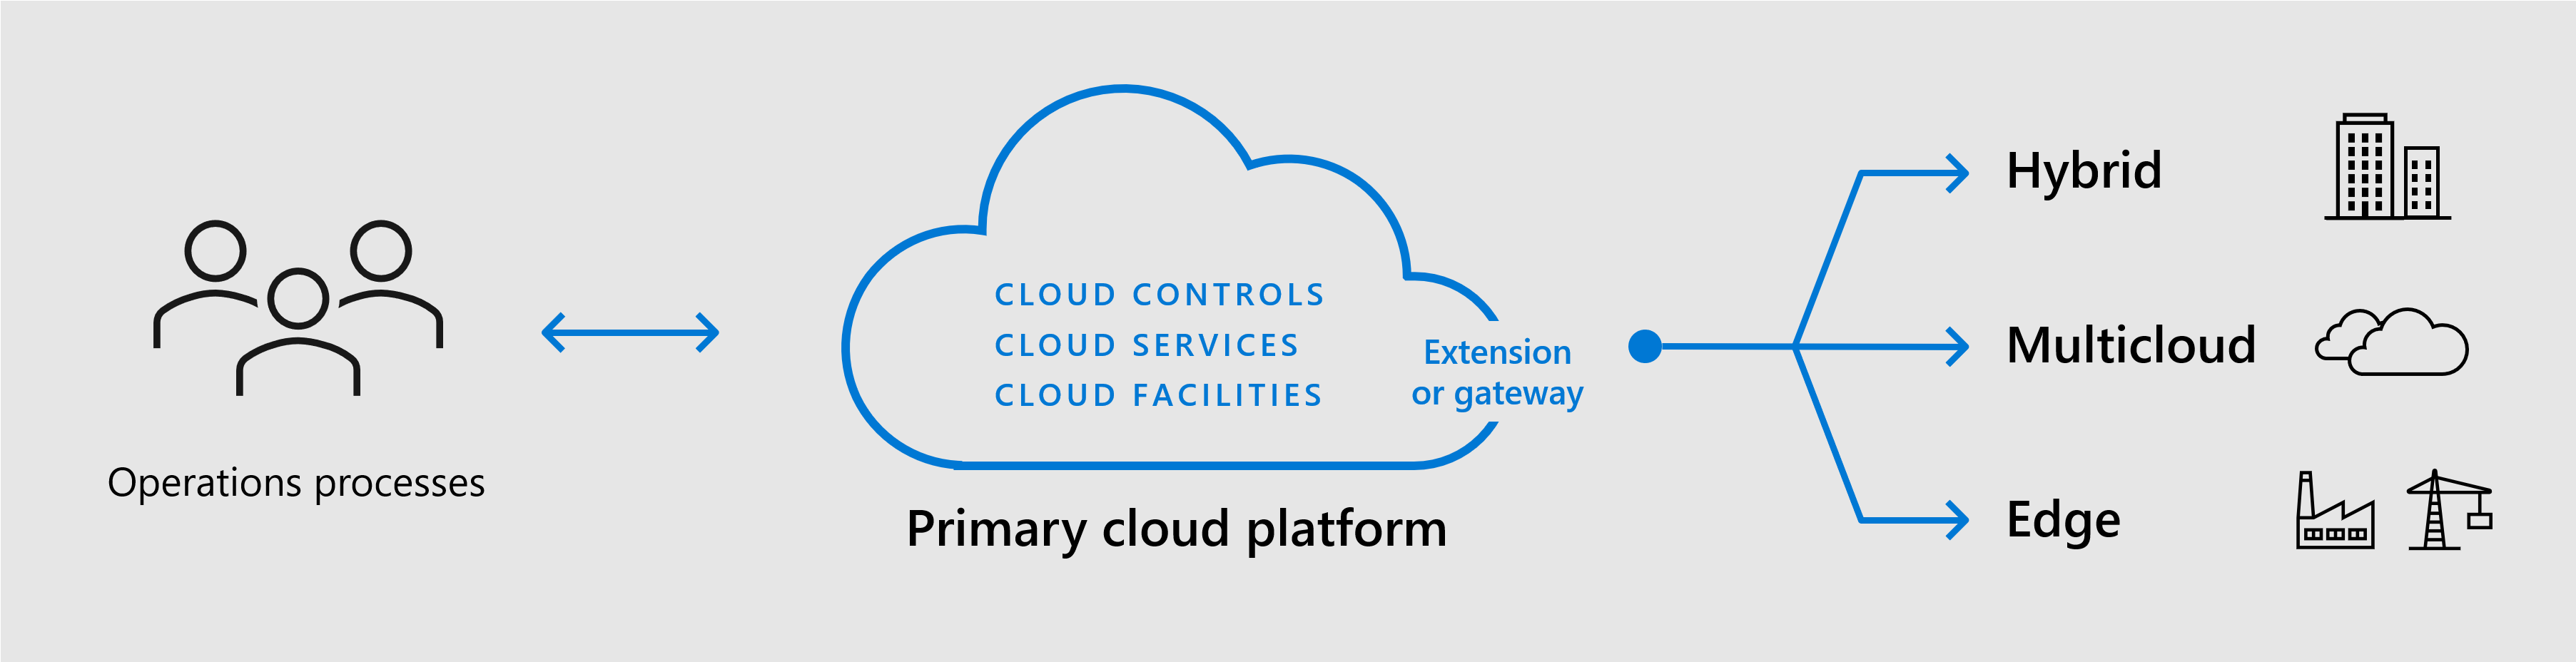 Diagram that shows how unified operations extends cloud controls to hybrid, multicloud, and edge deployments.